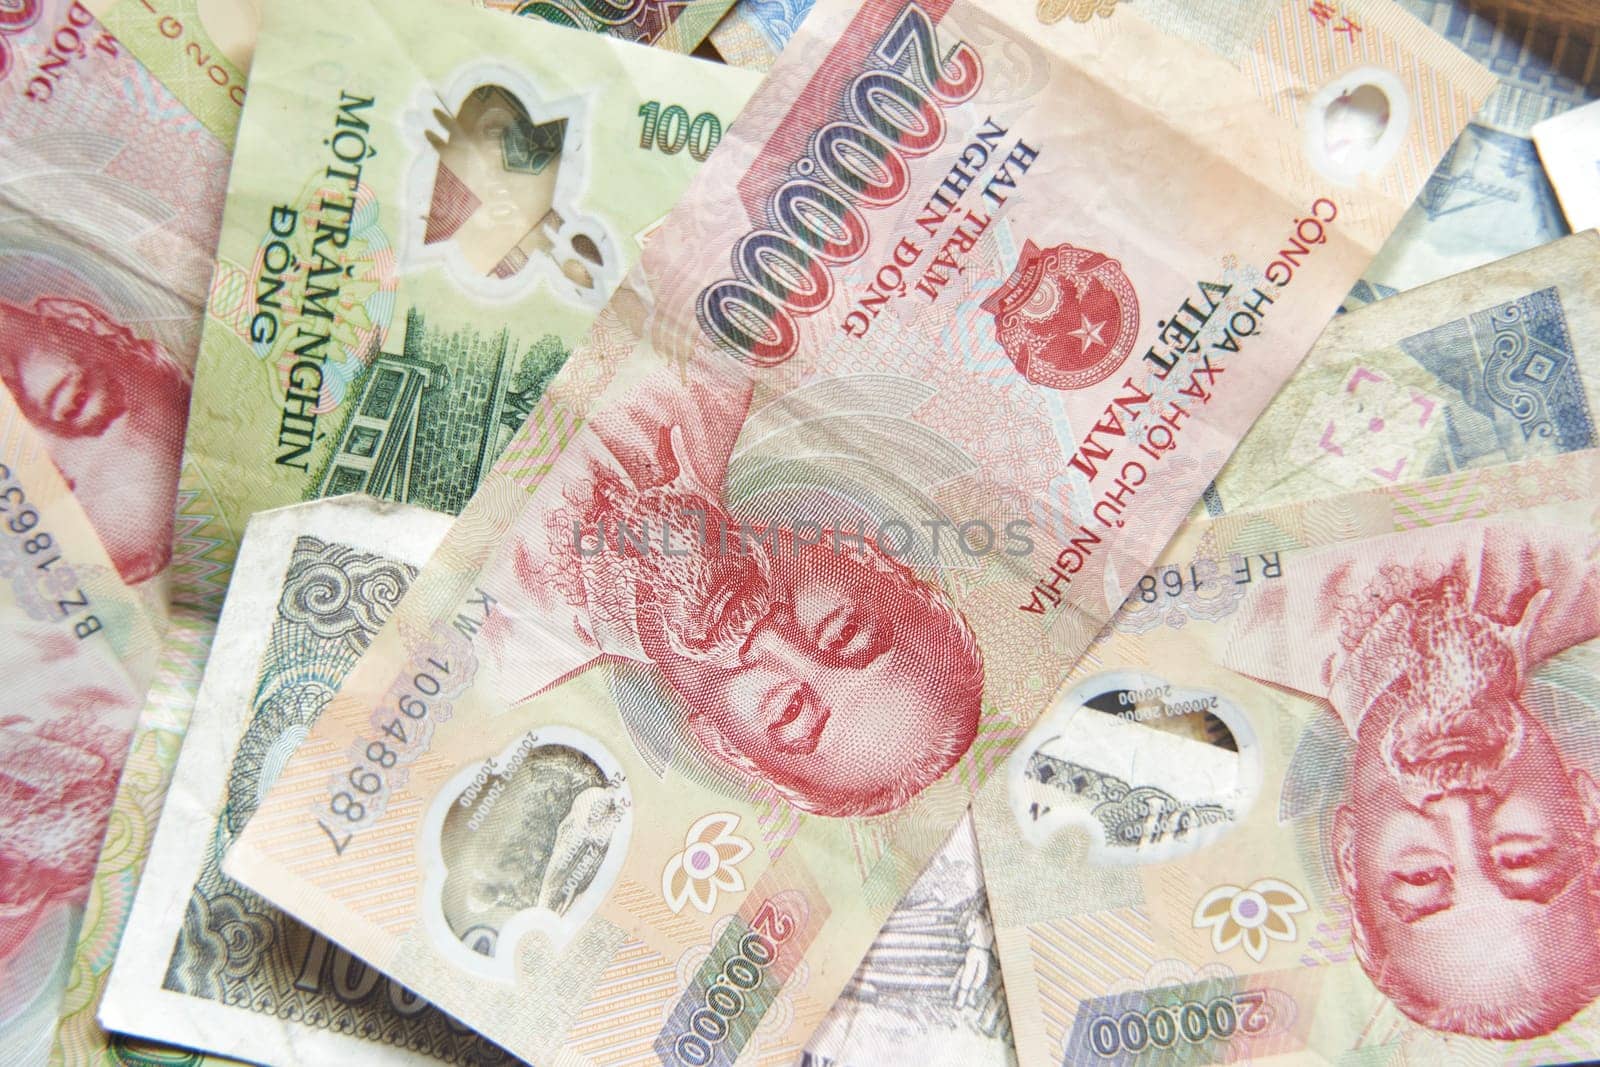 Vietnamese dong banknotes close-up. Money background. Vietnamese currency - dongs. Pattern texture and background of Vietnam dong money.